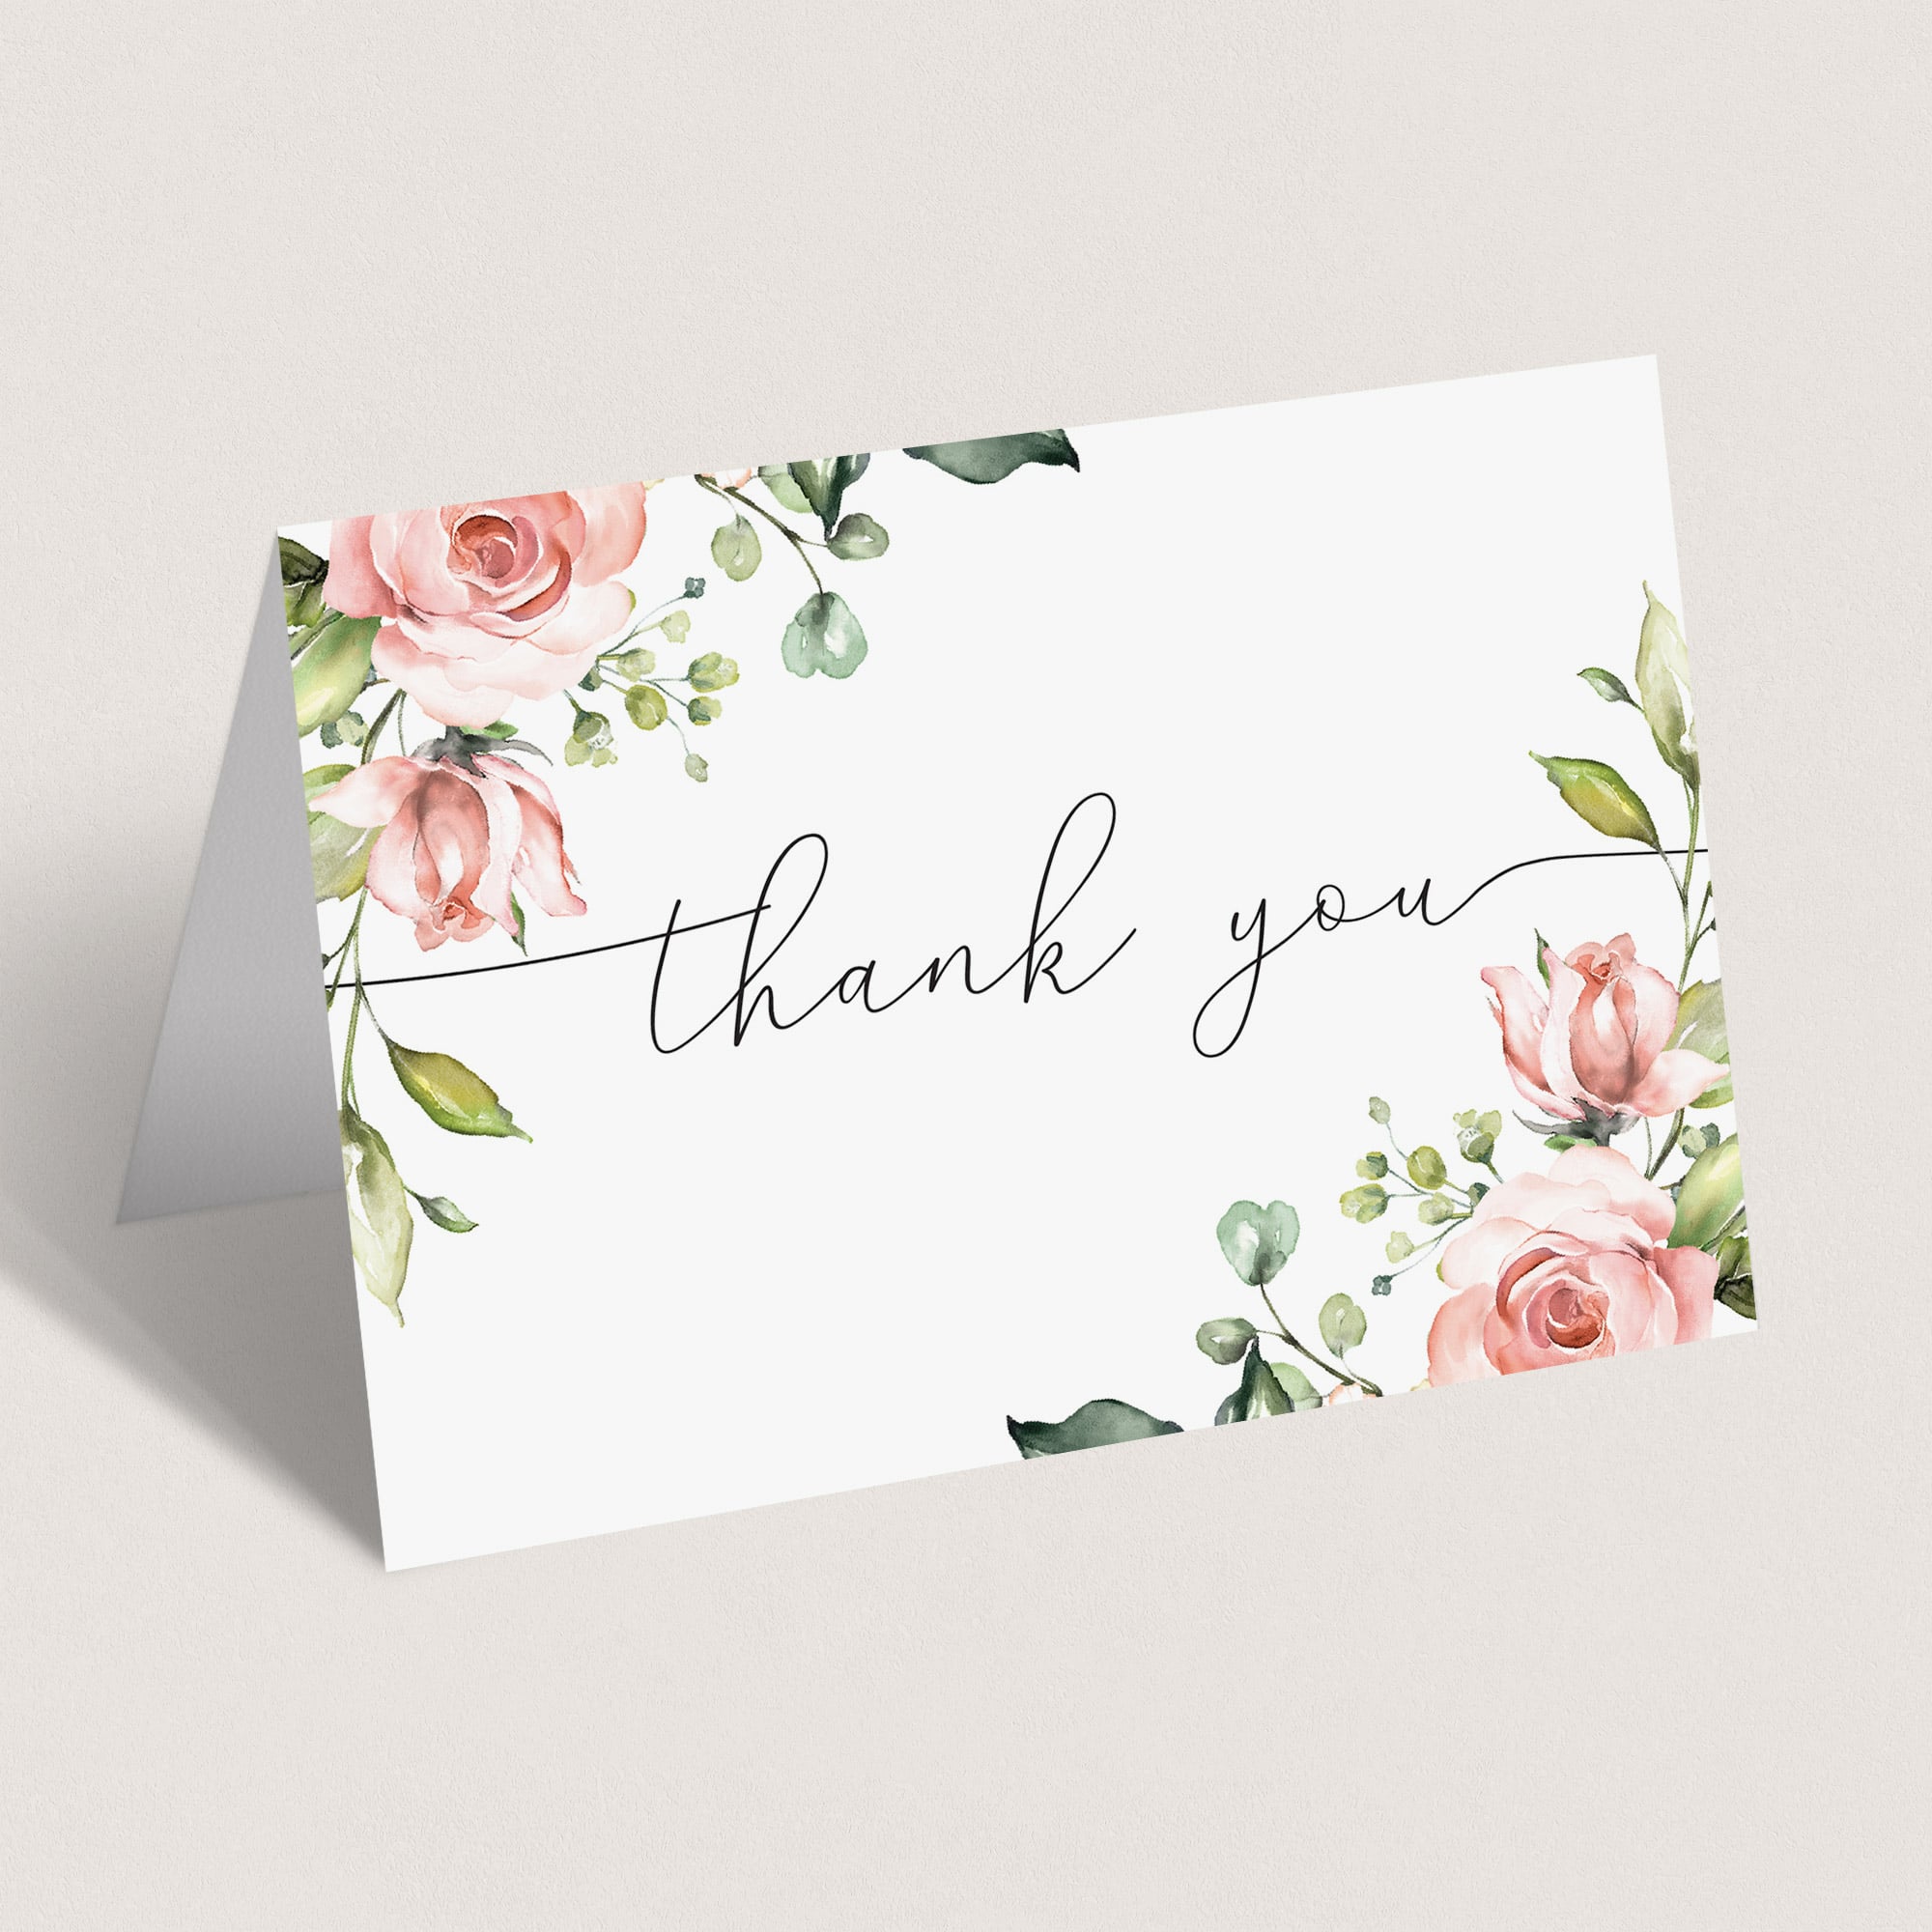 Thank you tent cards printables floral theme by LittleSizzle